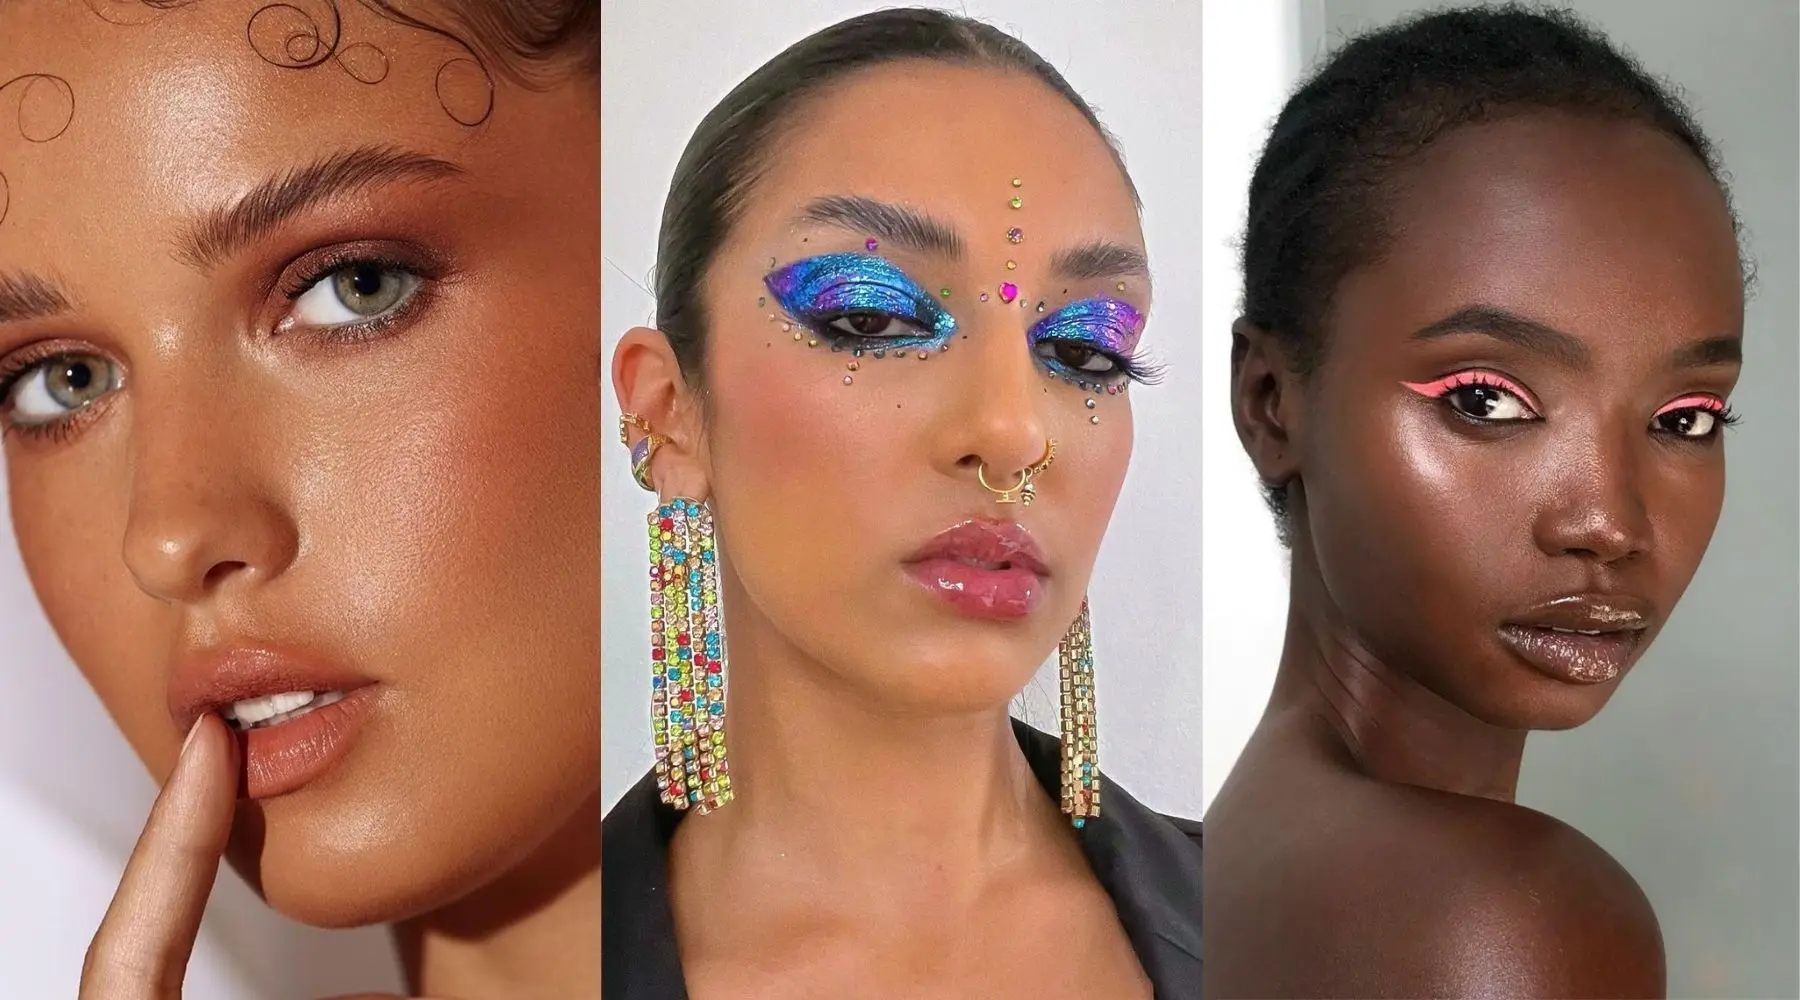 10 hottest beauty trends that’ll be big in 2022